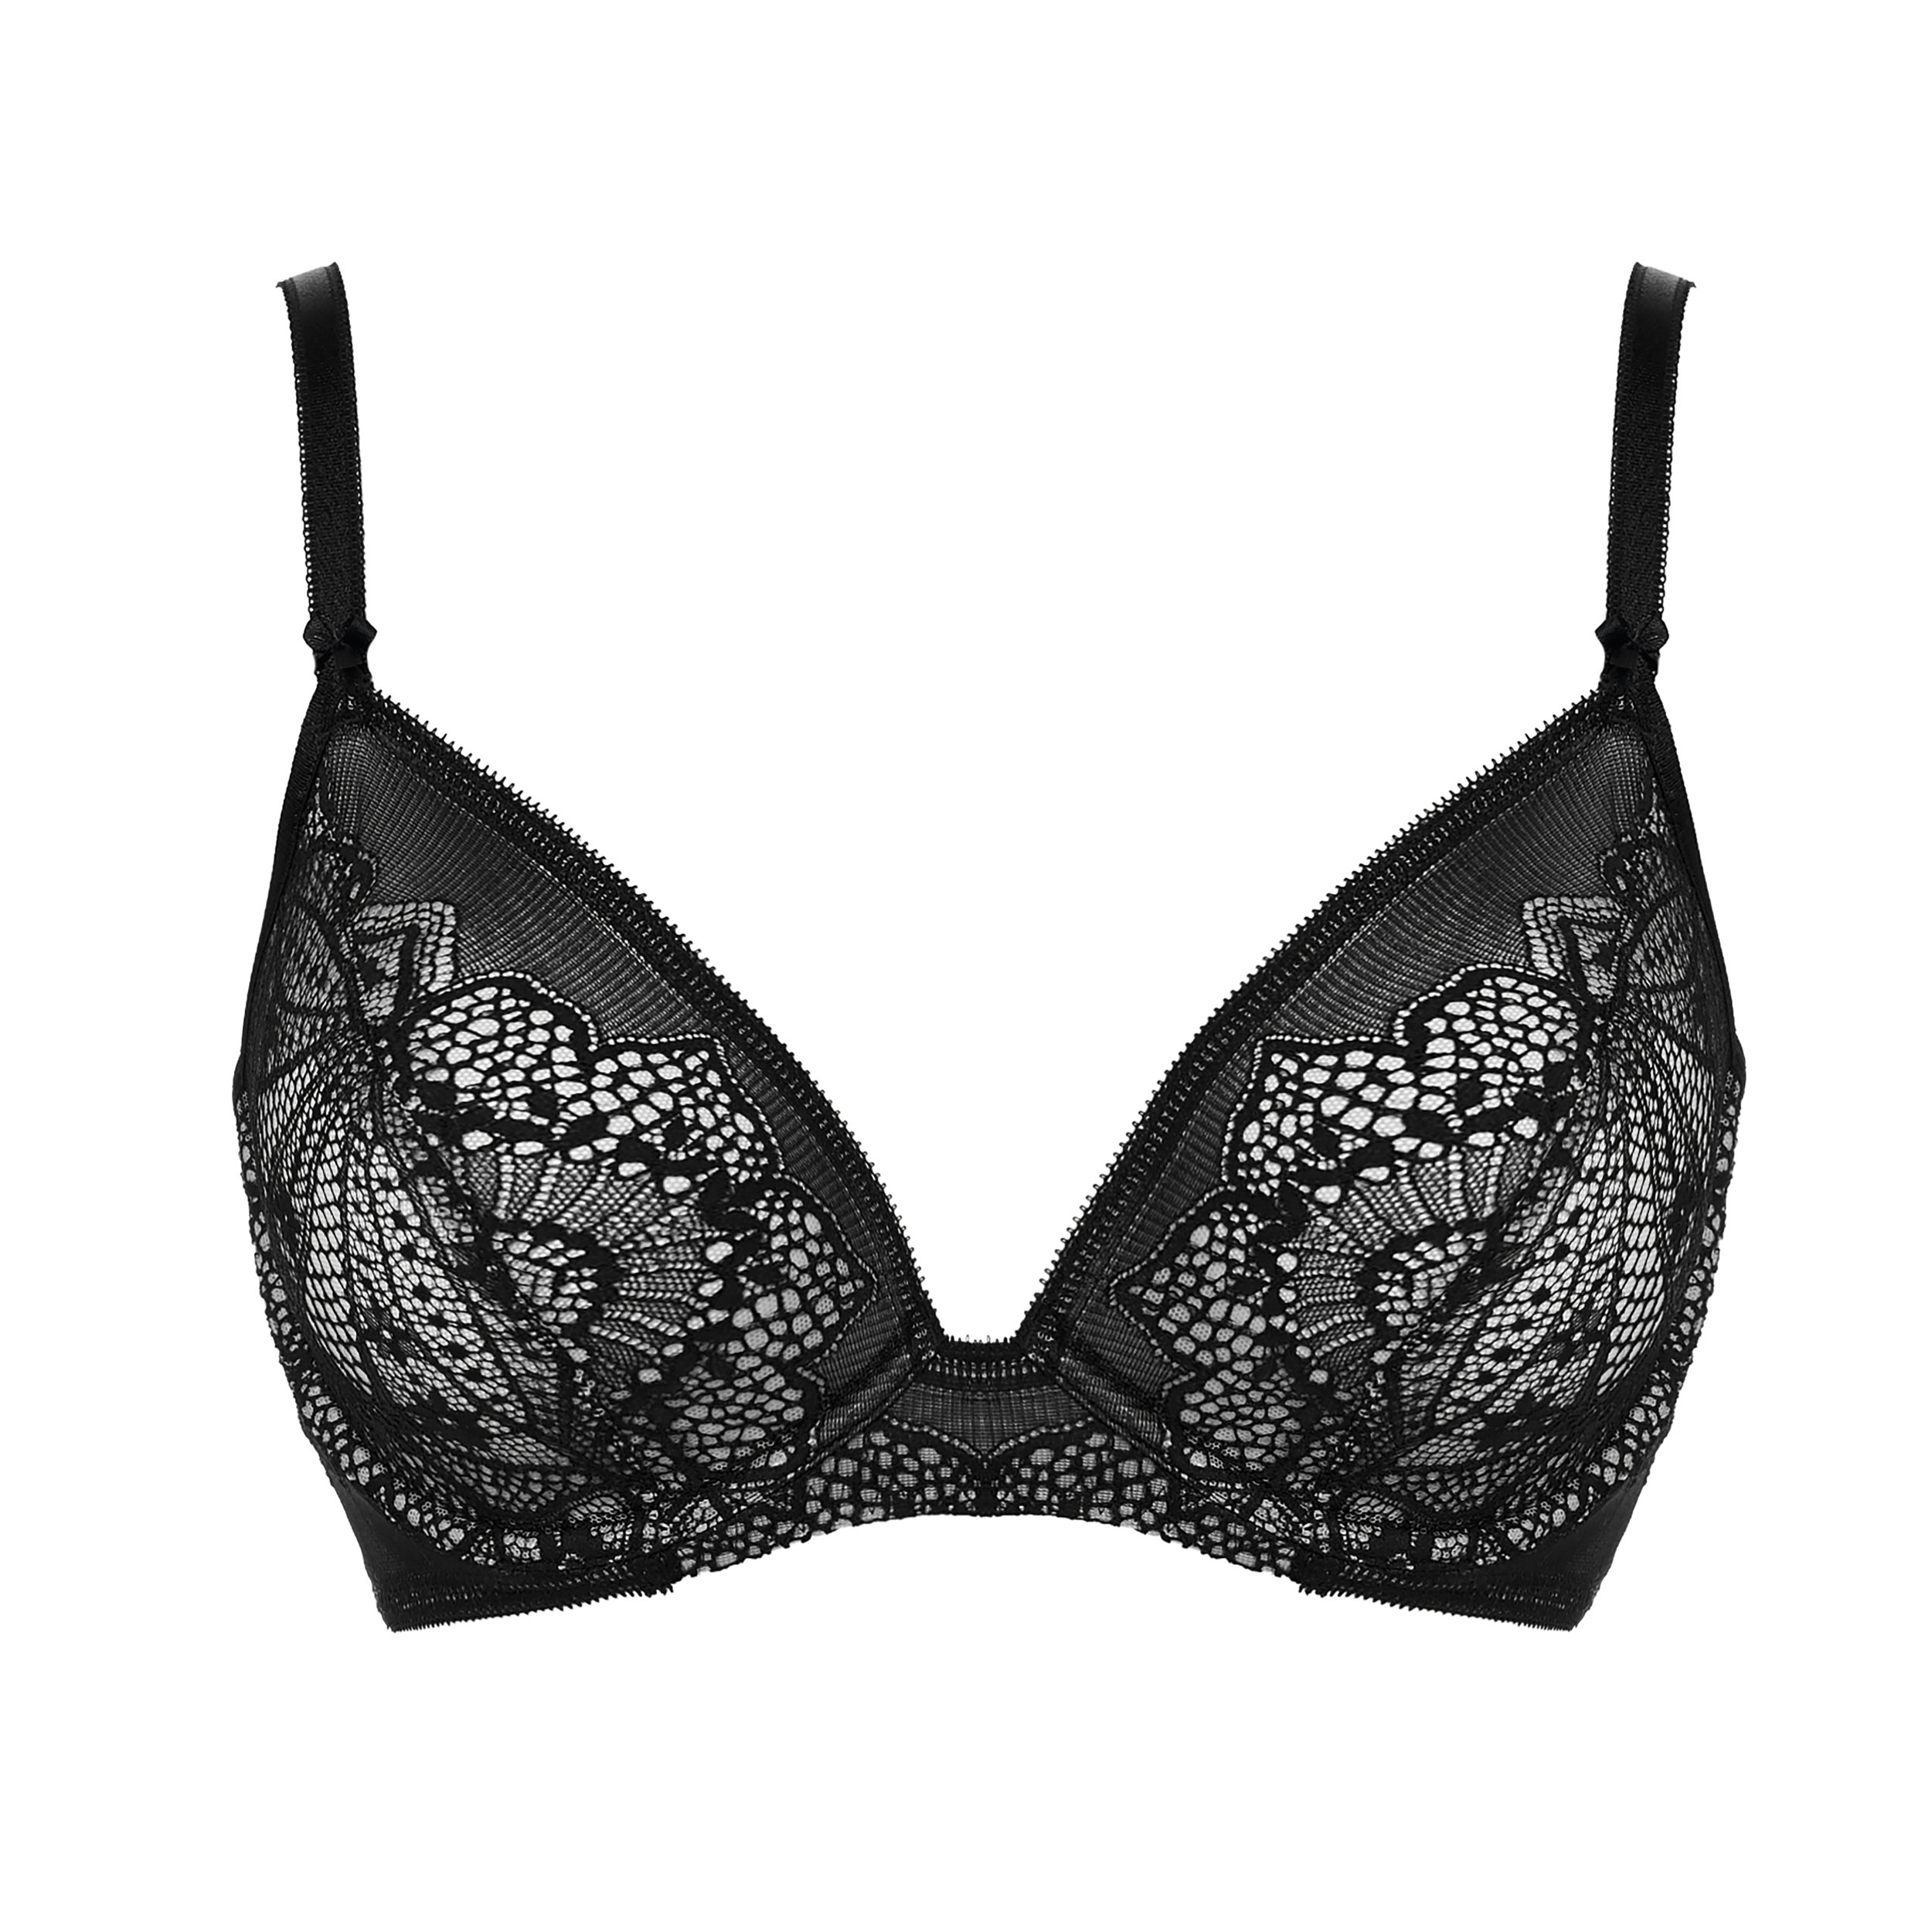 Time to update your lingerie? - BeautyEQ